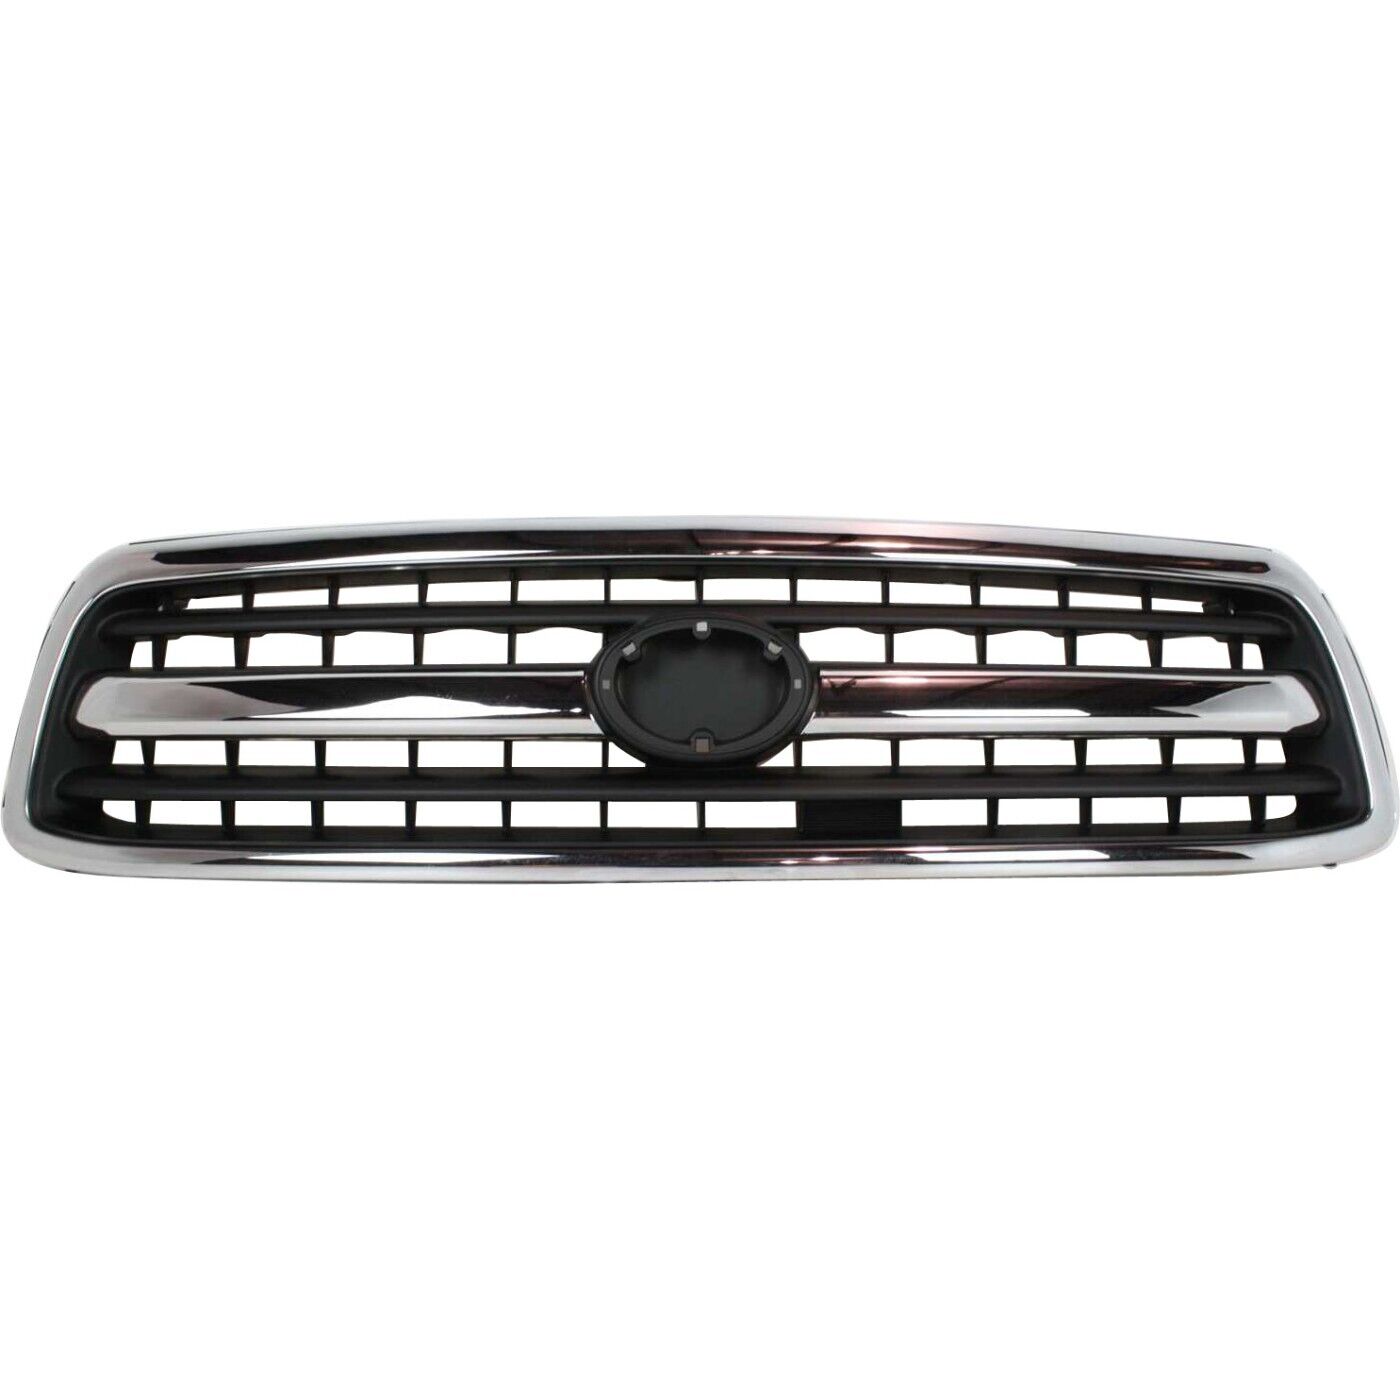 Grille For 2000-2002 Toyota Tundra Chrome Shell w/ Black Insert Plastic